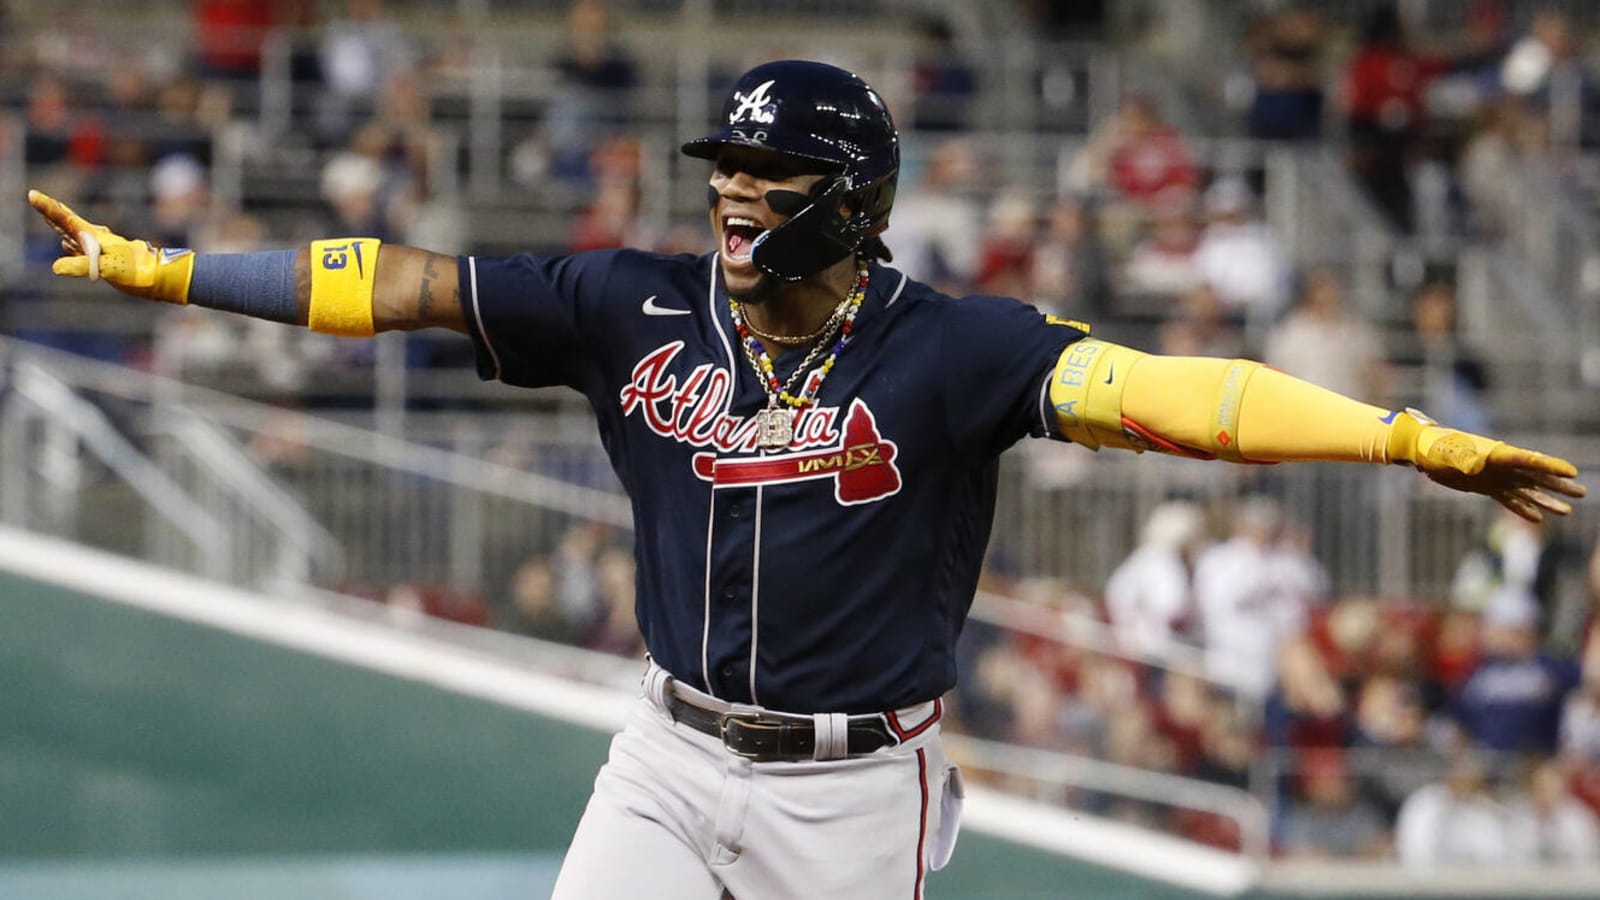 MLB: Acuna hits 40th home run to join exclusive 40-40 club in